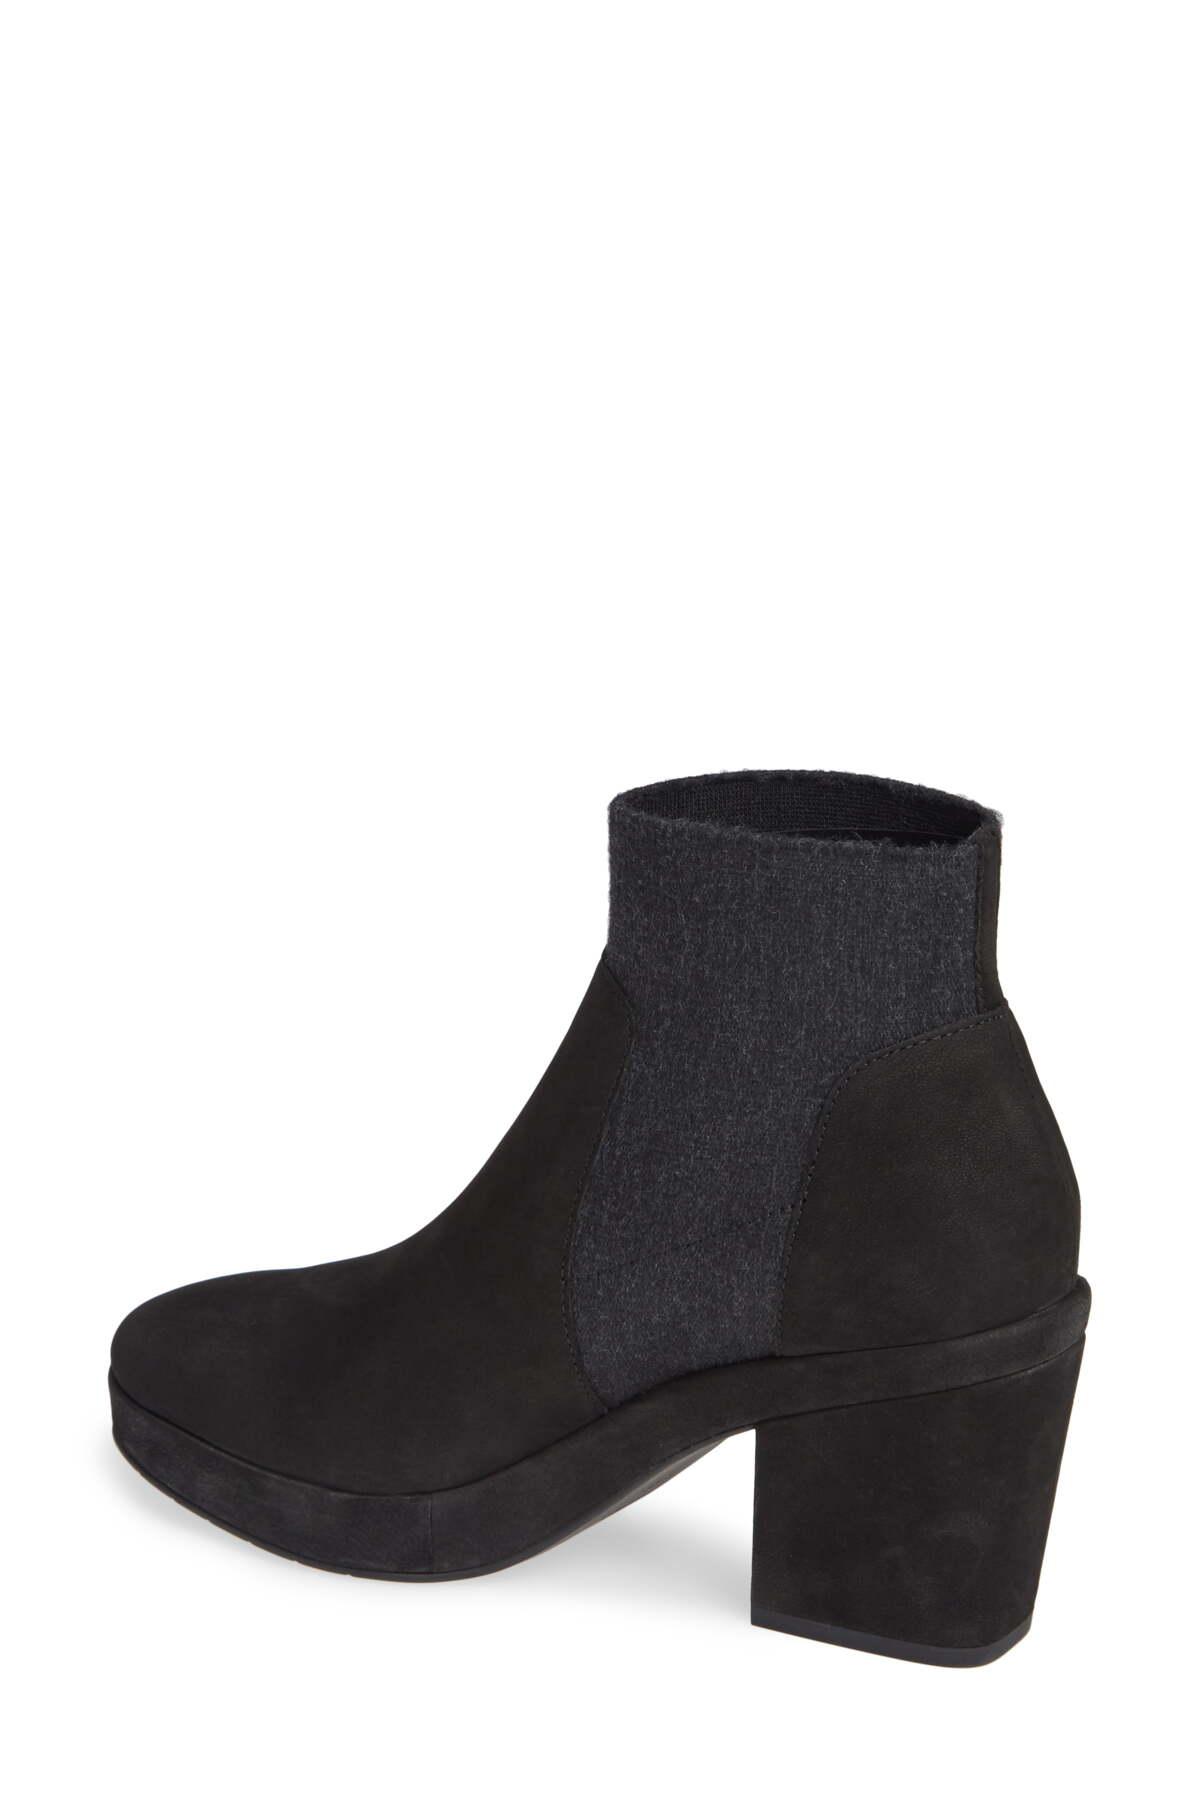 Eileen Fisher Leather Later Bootie in 